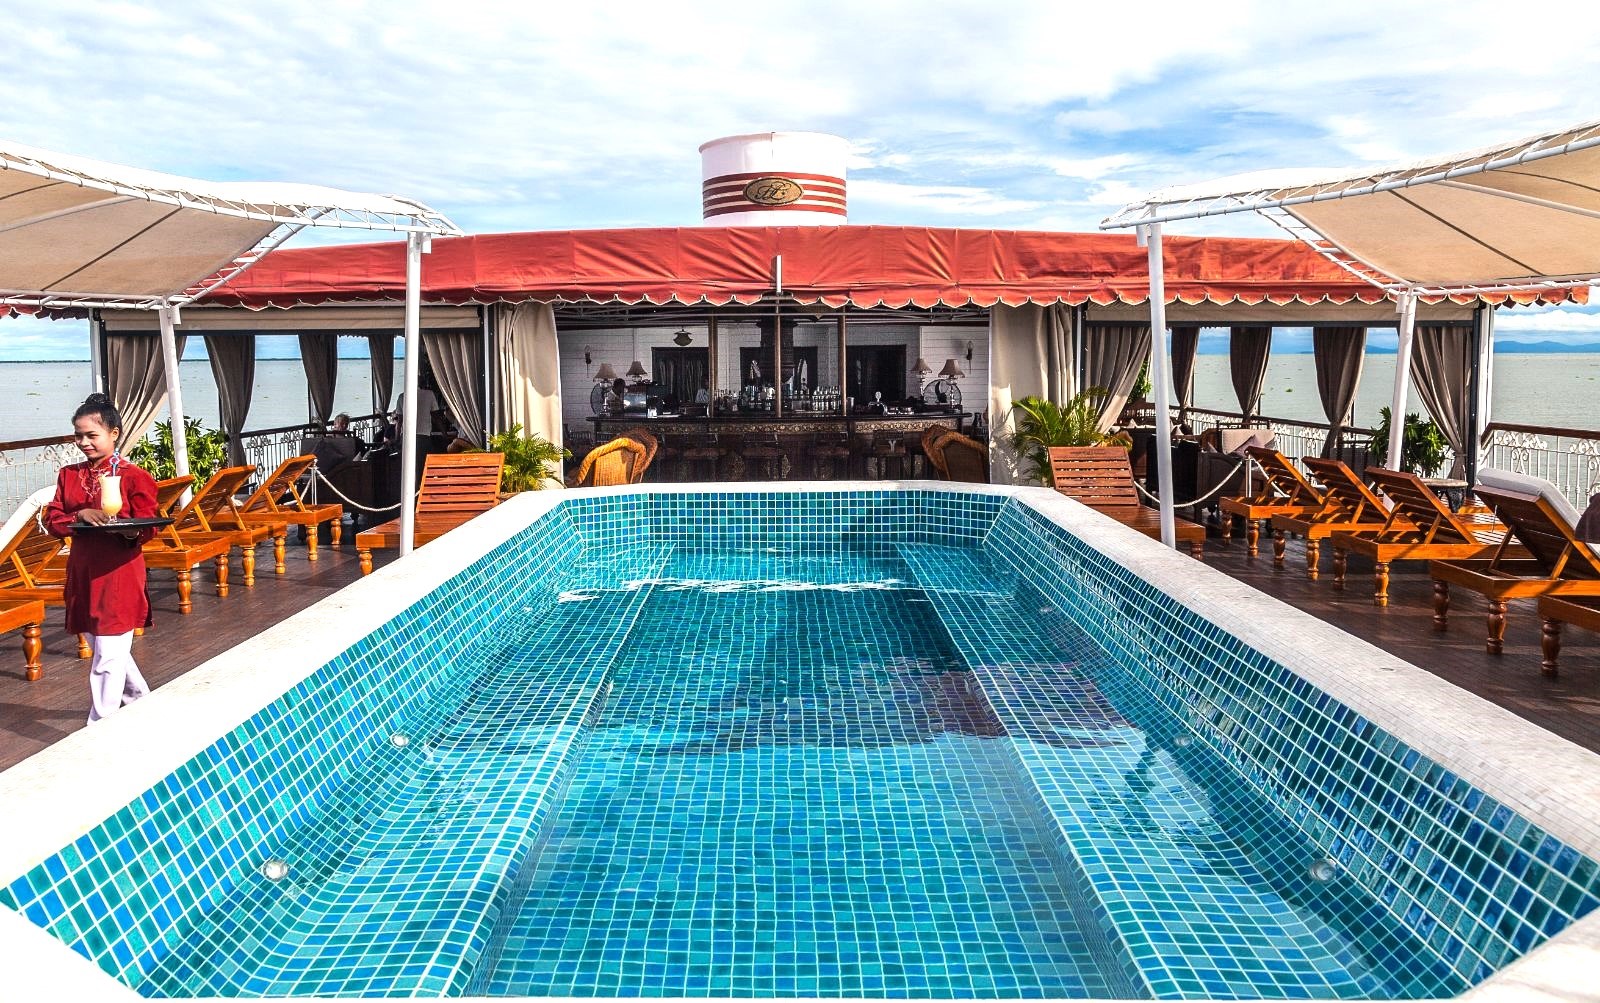 Swimming pool onboard the The Jahan Mekong River cruise in Vietnam